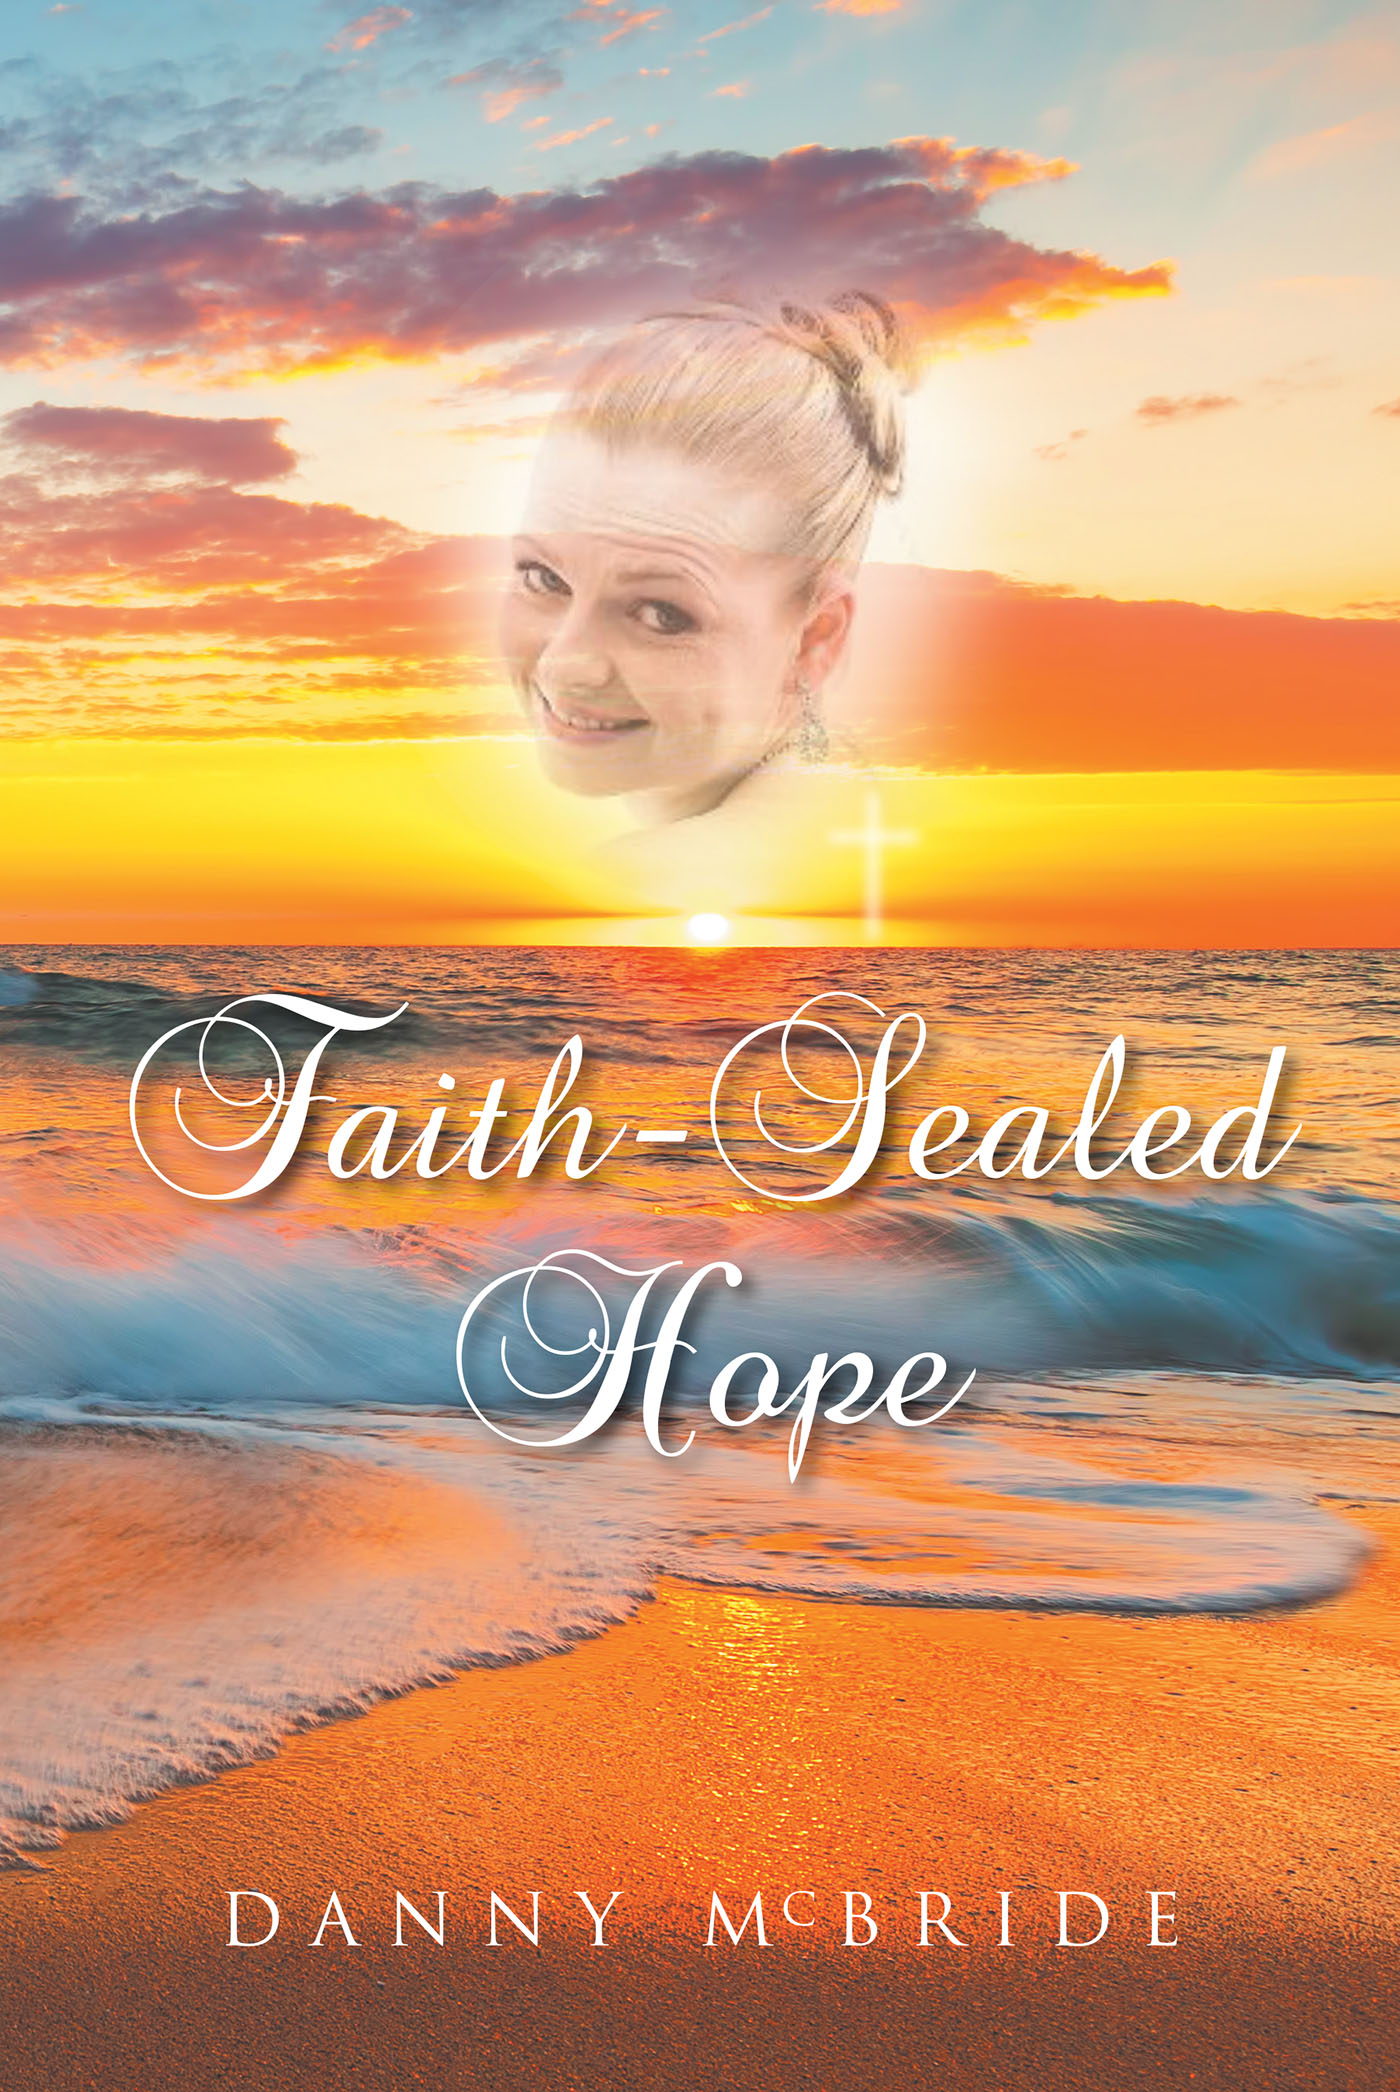 Danny McBride’s Newly Released “Faith-Sealed Hope” is a Powerful Celebration of a Loving Wife and Reflection on the Complexities of Loss